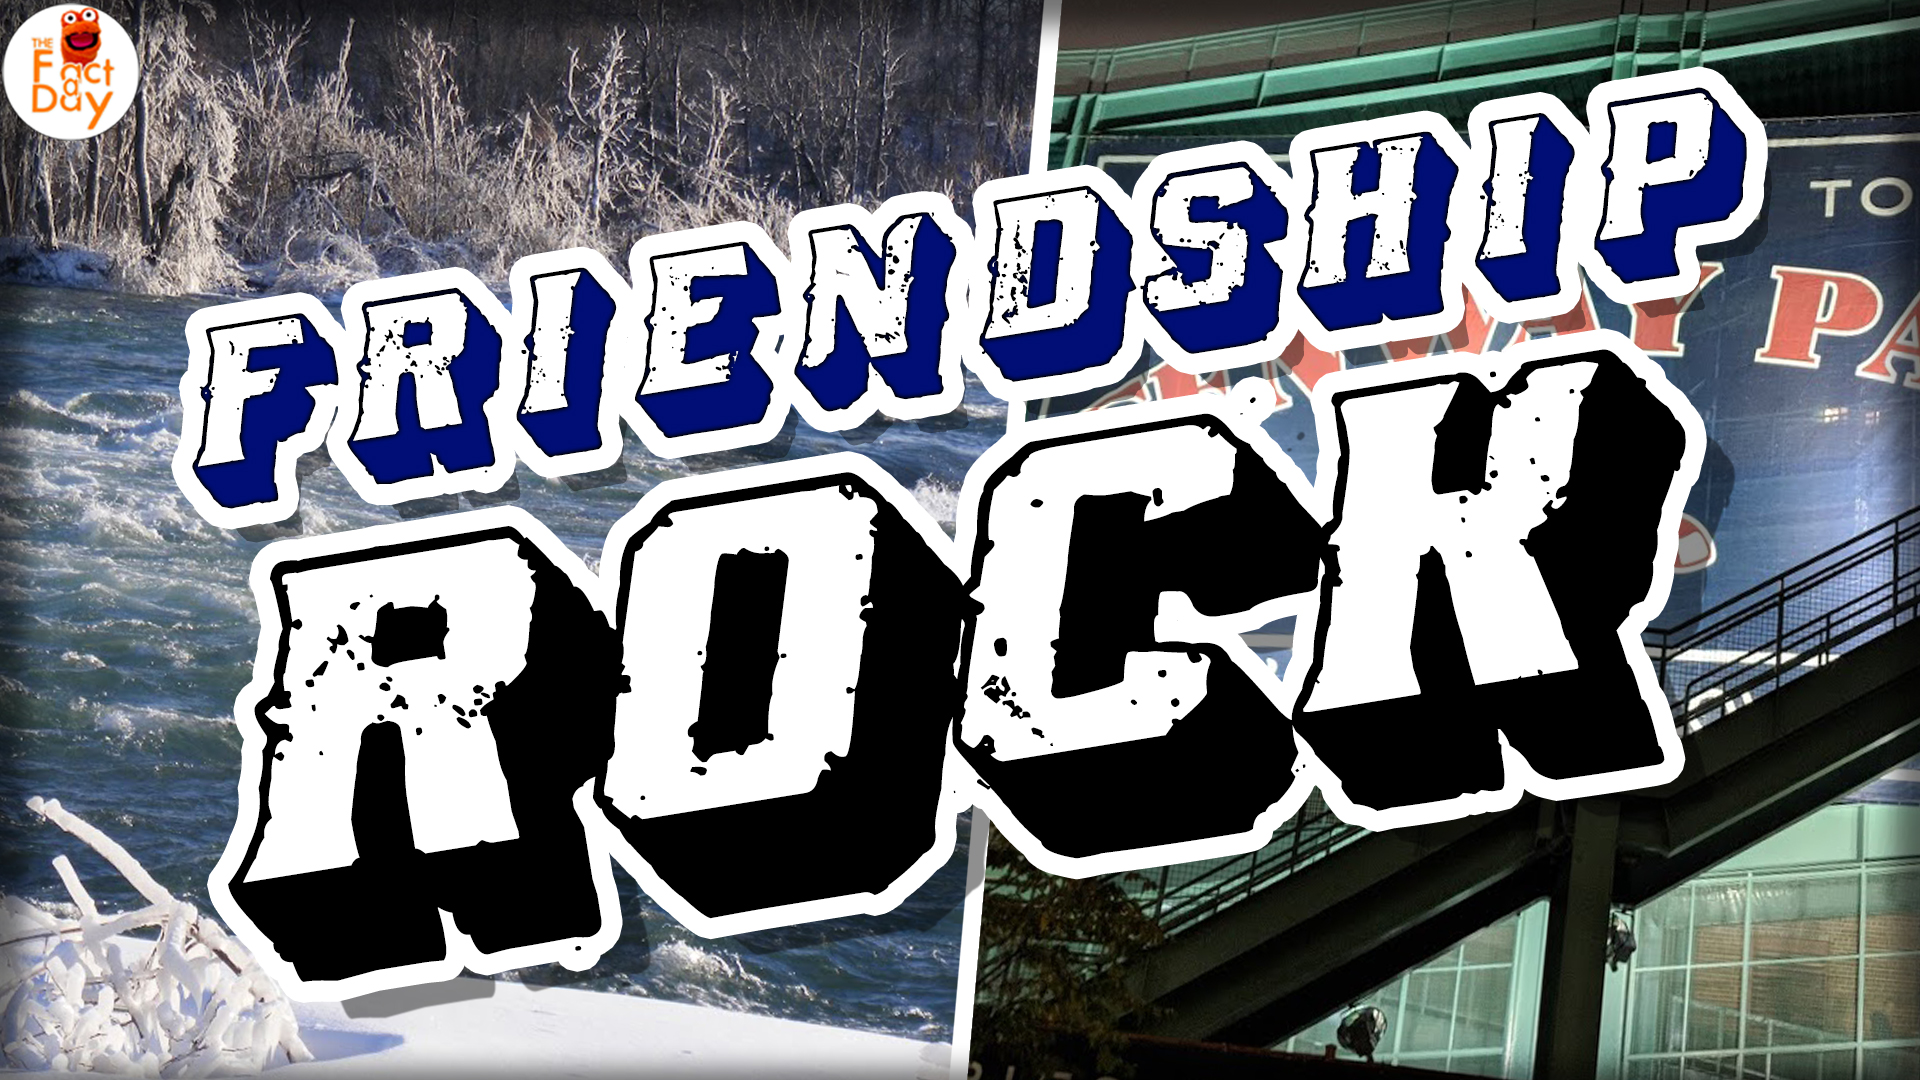 The Fact a Day - Friendship Rock